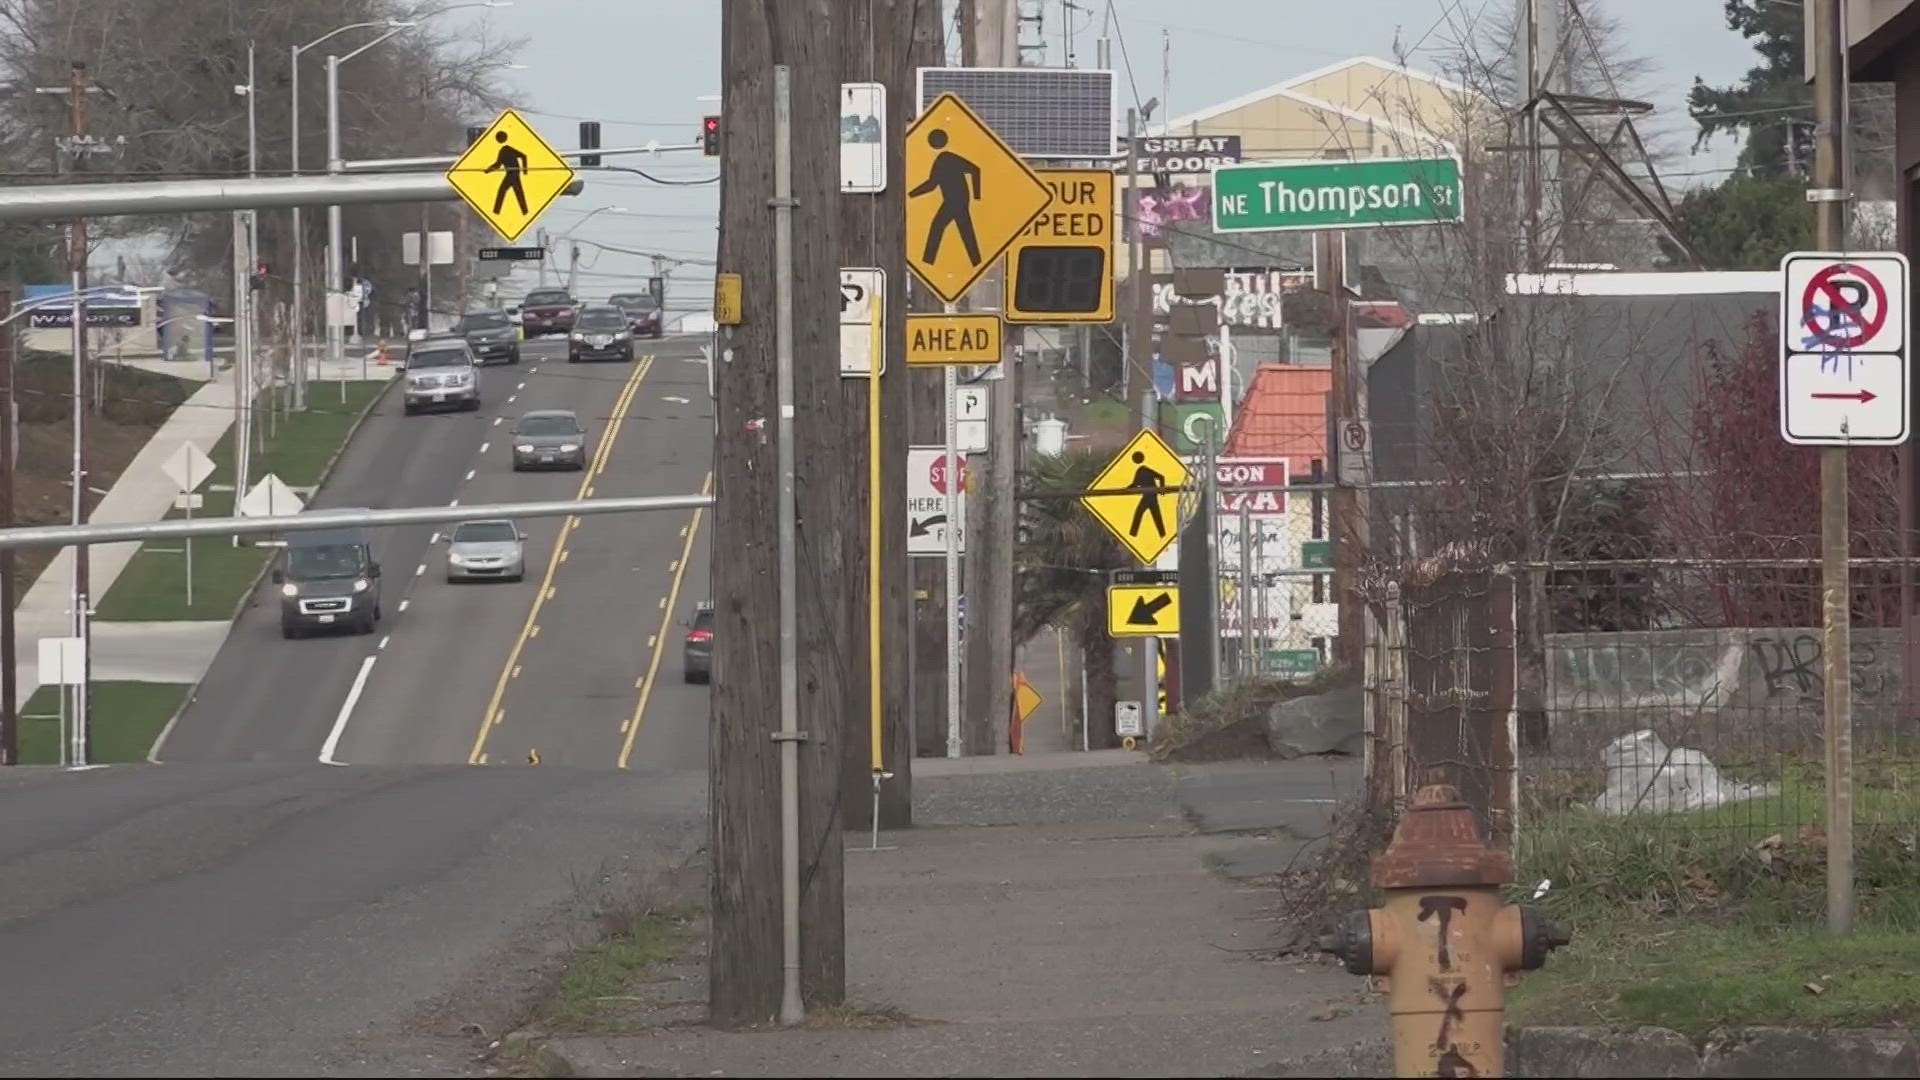 Safety modifications have started on the high crash corridor that stretches for seven miles on 82nd Avenue with hopes to increase safety in the area